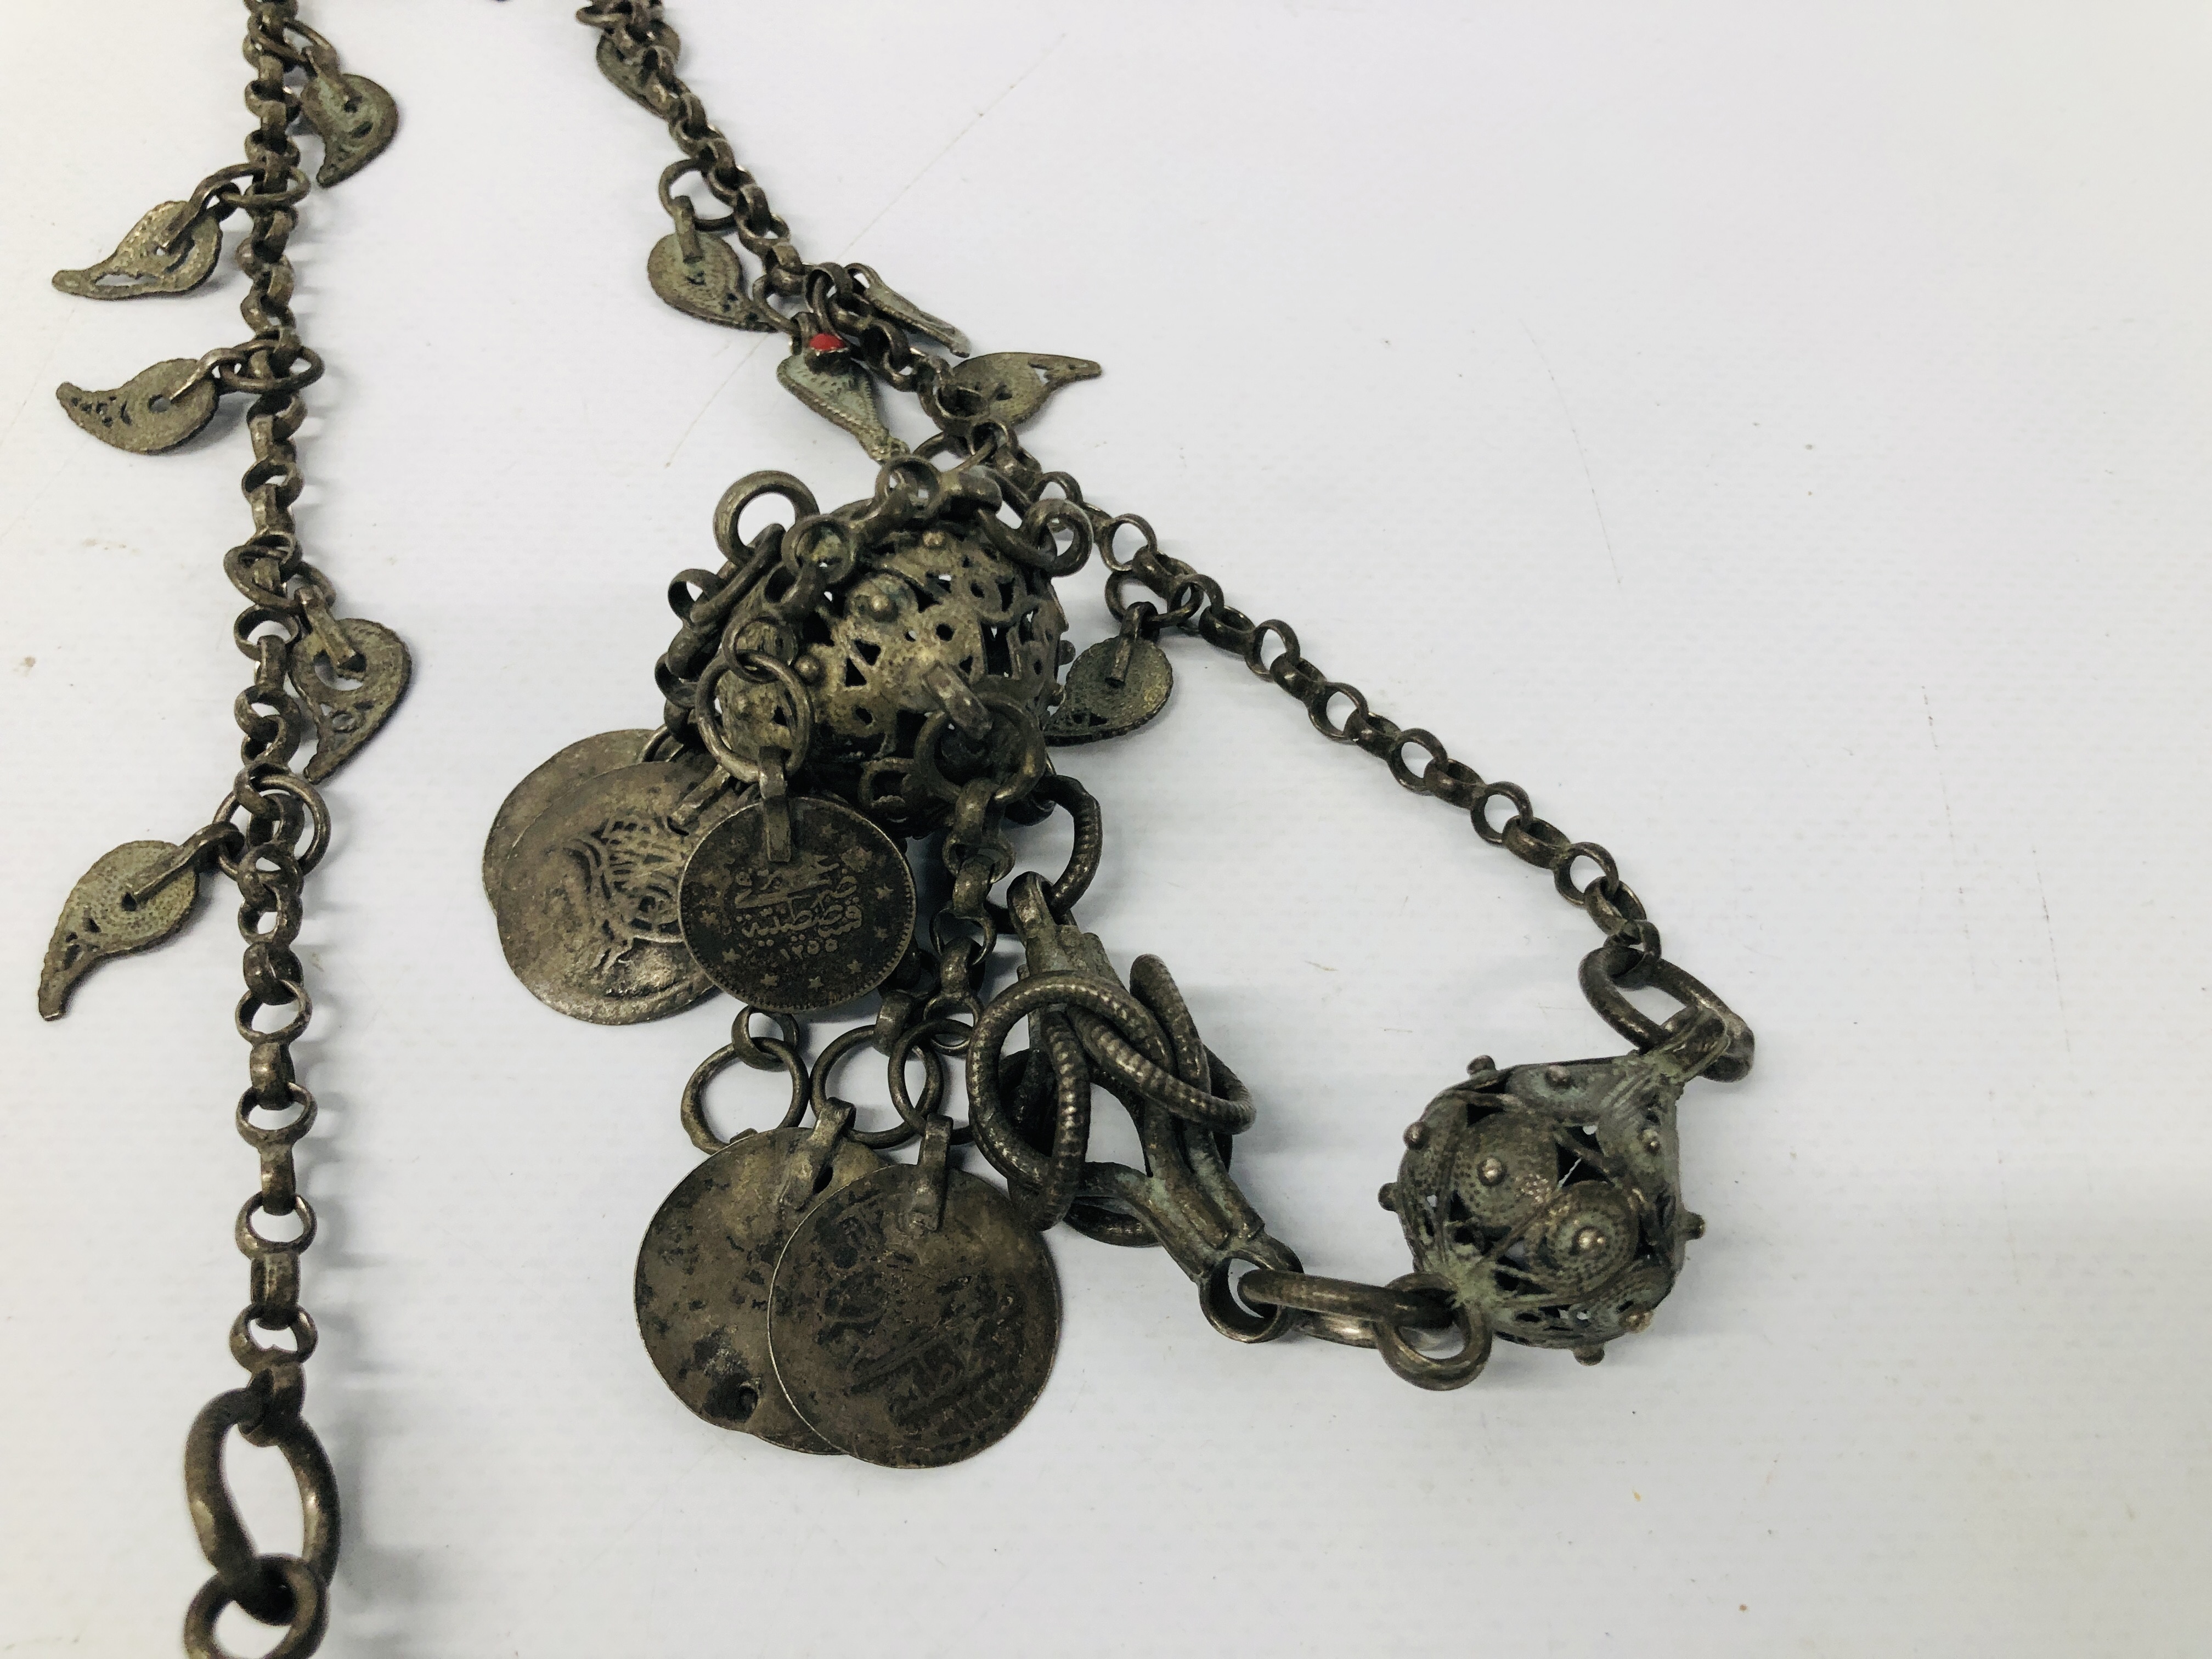 AN ANTIQUE PERSIAN DECORATIVE CHAIN WITH COIN TASSELS. - Image 5 of 6